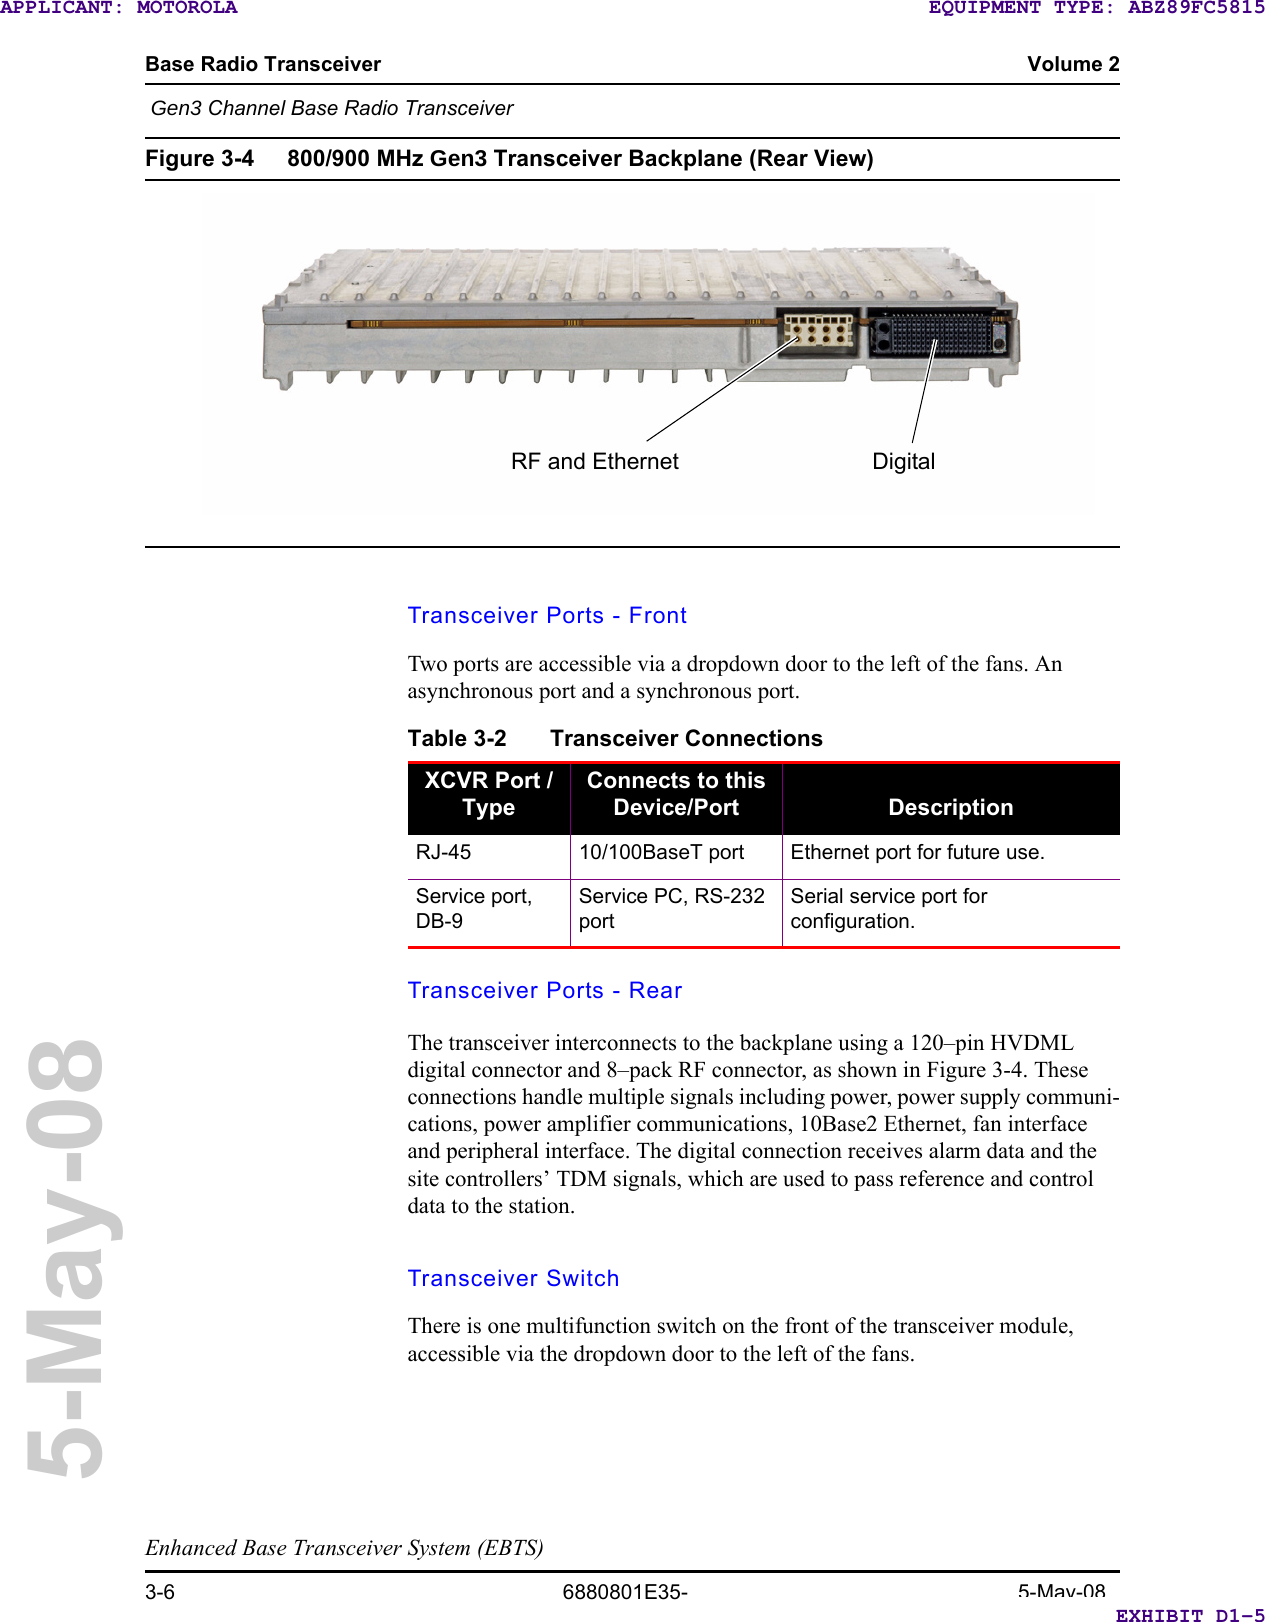 Base Radio Transceiver Volume 2 Gen3 Channel Base Radio TransceiverEnhanced Base Transceiver System (EBTS)3-6 6880801E35- 5-May-085-May-08Figure 3-4 800/900 MHz Gen3 Transceiver Backplane (Rear View) Transceiver Ports - FrontTwo ports are accessible via a dropdown door to the left of the fans. An asynchronous port and a synchronous port.Transceiver Ports - RearThe transceiver interconnects to the backplane using a 120–pin HVDML digital connector and 8–pack RF connector, as shown in Figure 3-4. These connections handle multiple signals including power, power supply communi-cations, power amplifier communications, 10Base2 Ethernet, fan interface and peripheral interface. The digital connection receives alarm data and the site controllers’ TDM signals, which are used to pass reference and control data to the station.Transceiver SwitchThere is one multifunction switch on the front of the transceiver module, accessible via the dropdown door to the left of the fans.RF and Ethernet DigitalTable 3-2 Transceiver ConnectionsXCVR Port / TypeConnects to this Device/Port DescriptionRJ-45 10/100BaseT port Ethernet port for future use.Service port, DB-9Service PC, RS-232 portSerial service port for configuration.EXHIBIT D1-5EQUIPMENT TYPE: ABZ89FC5815APPLICANT: MOTOROLA